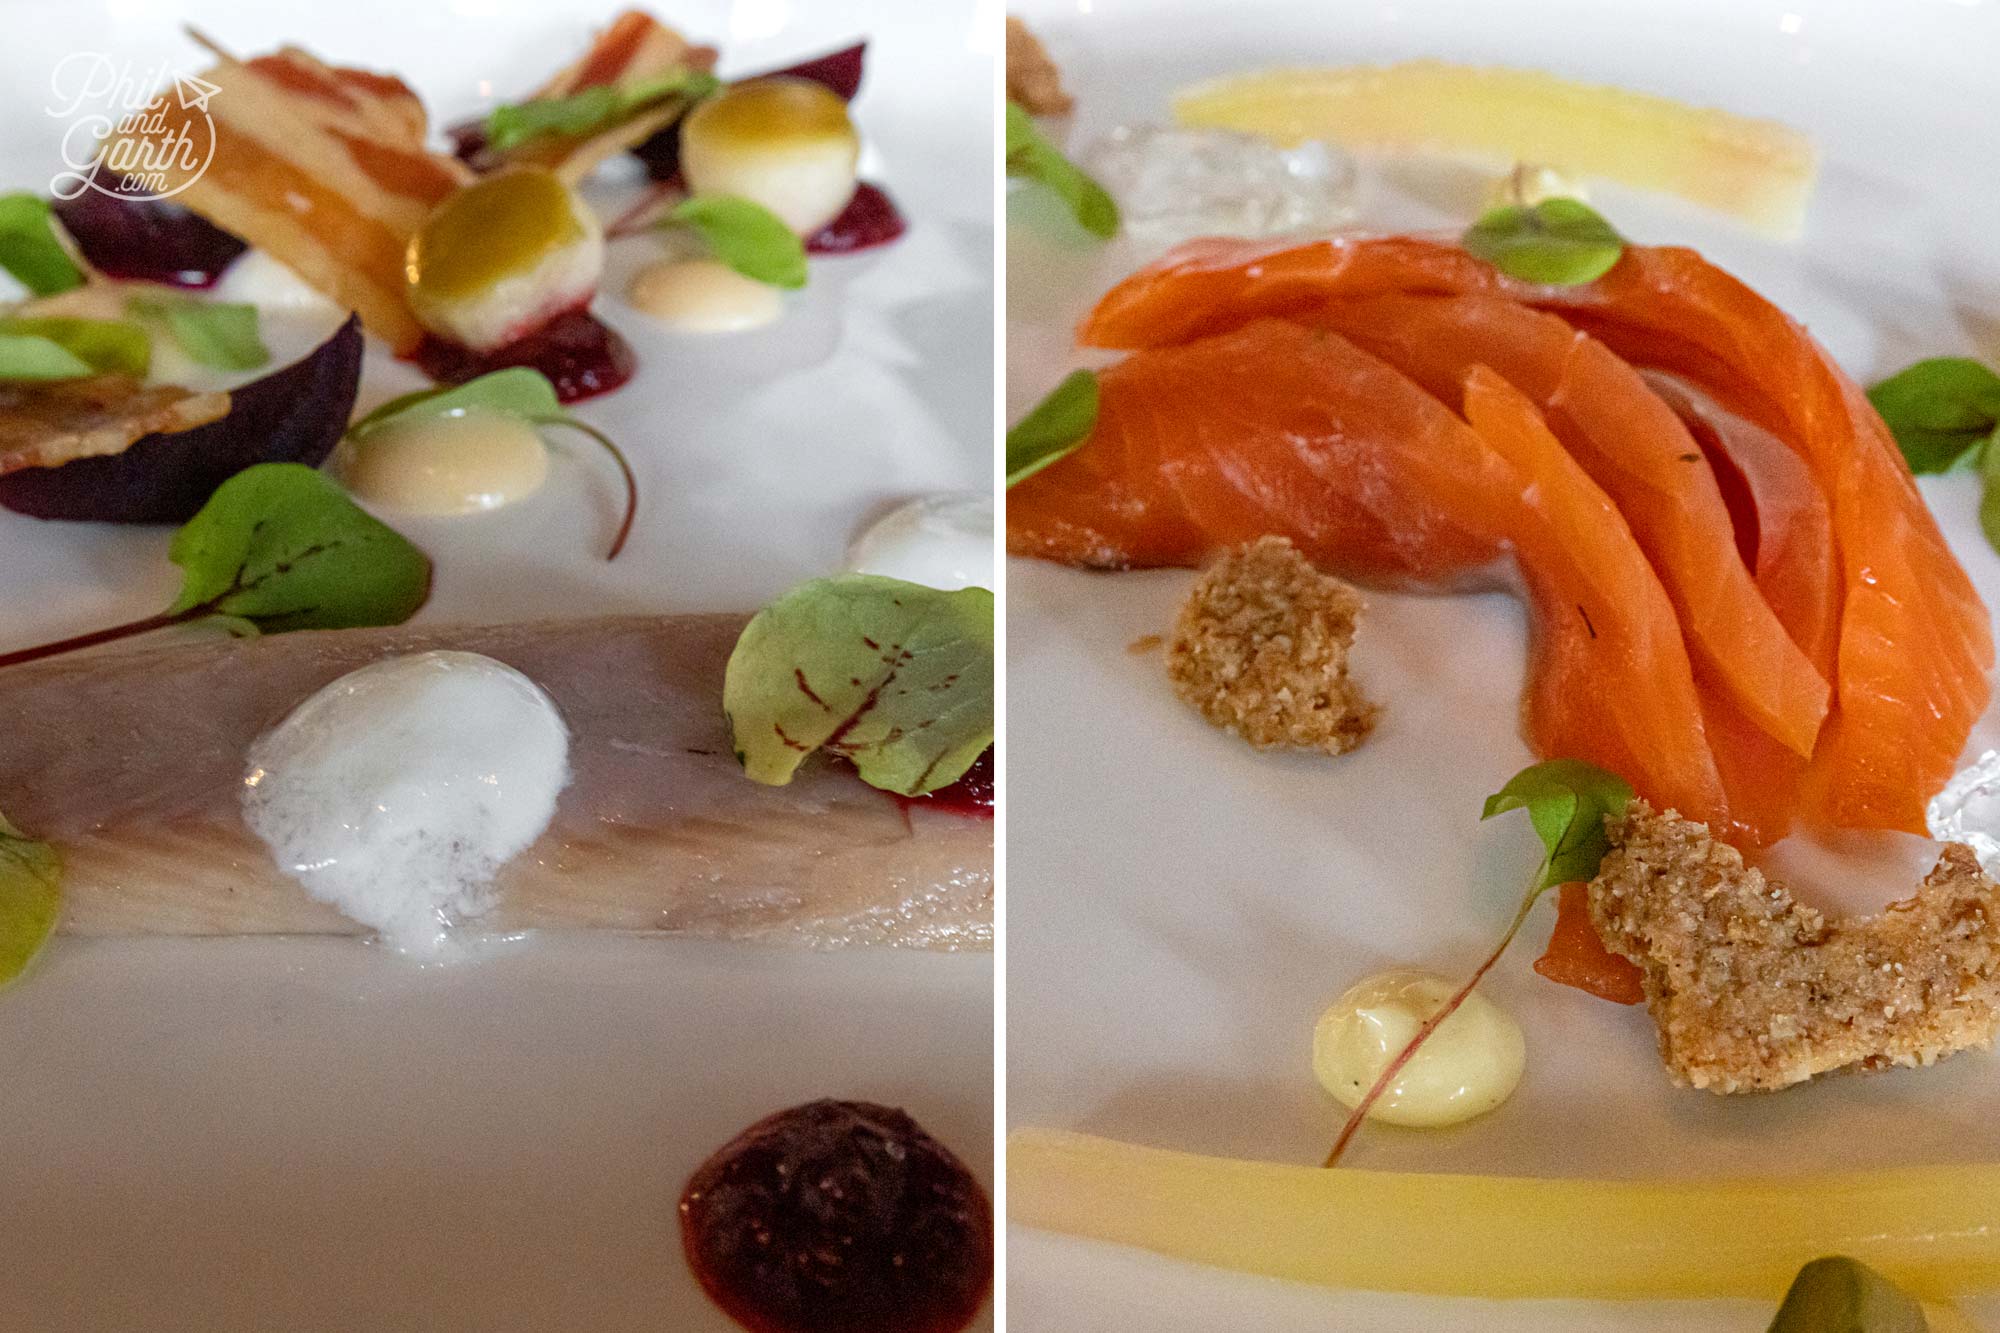 Our starters of cured salmon, gin jelly, wasabi and Smoked eel, pickled apple and beetroot